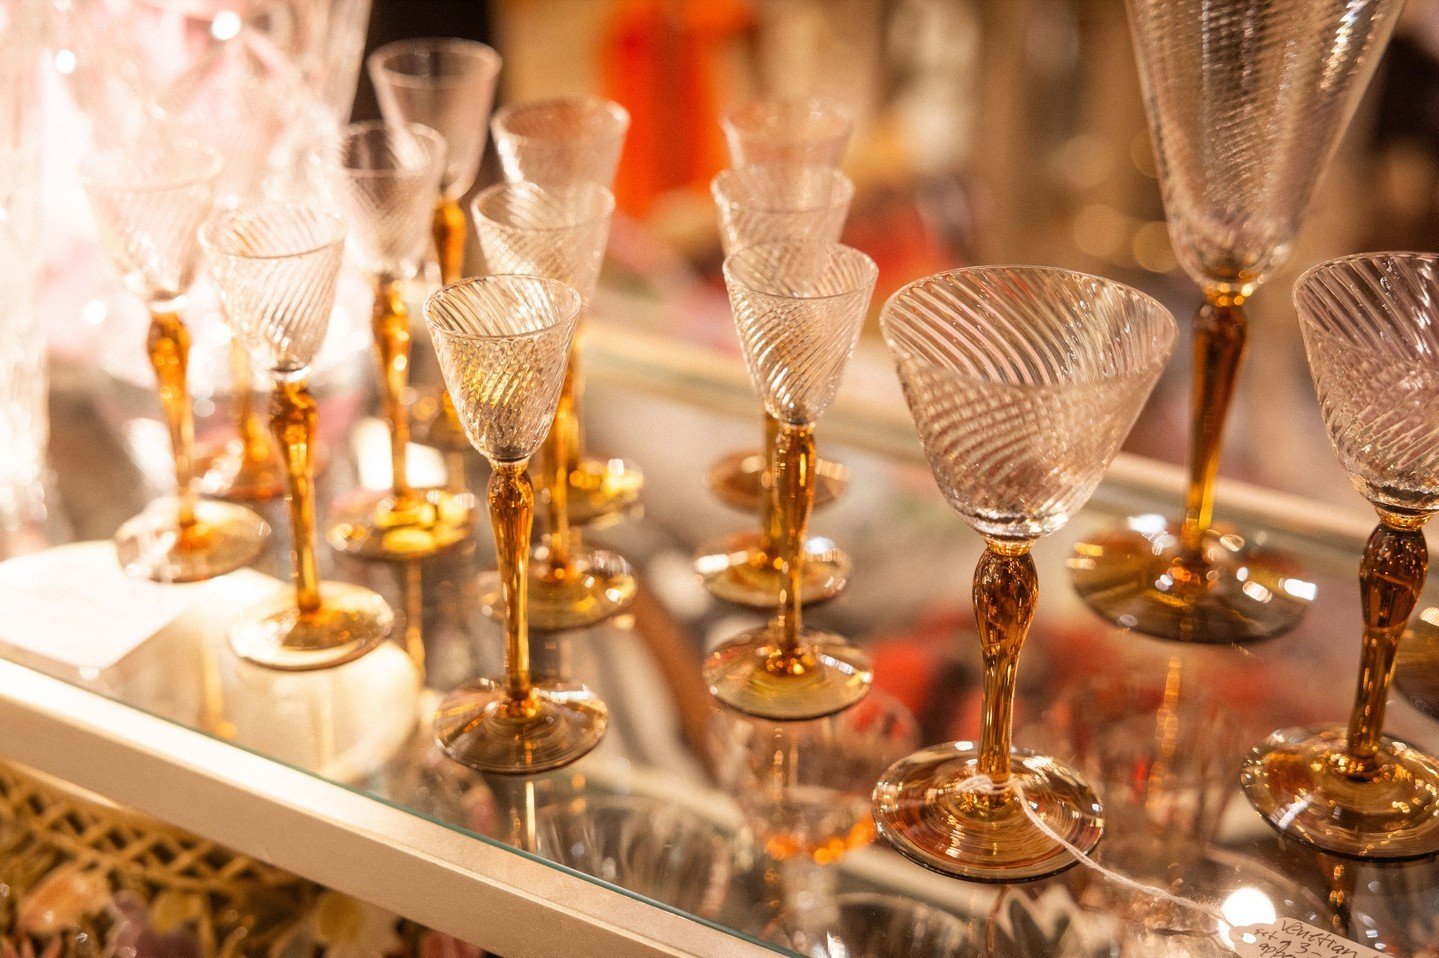 Have you ever seen such beautiful #vintage glassware? 😍 Come visit our #antique Center &amp; Annex every day from 10am-6pm to shop our curated collections of vintage and antique d&eacute;cor, furniture, clothing, and more!

#ShopAntiques #VintageGla